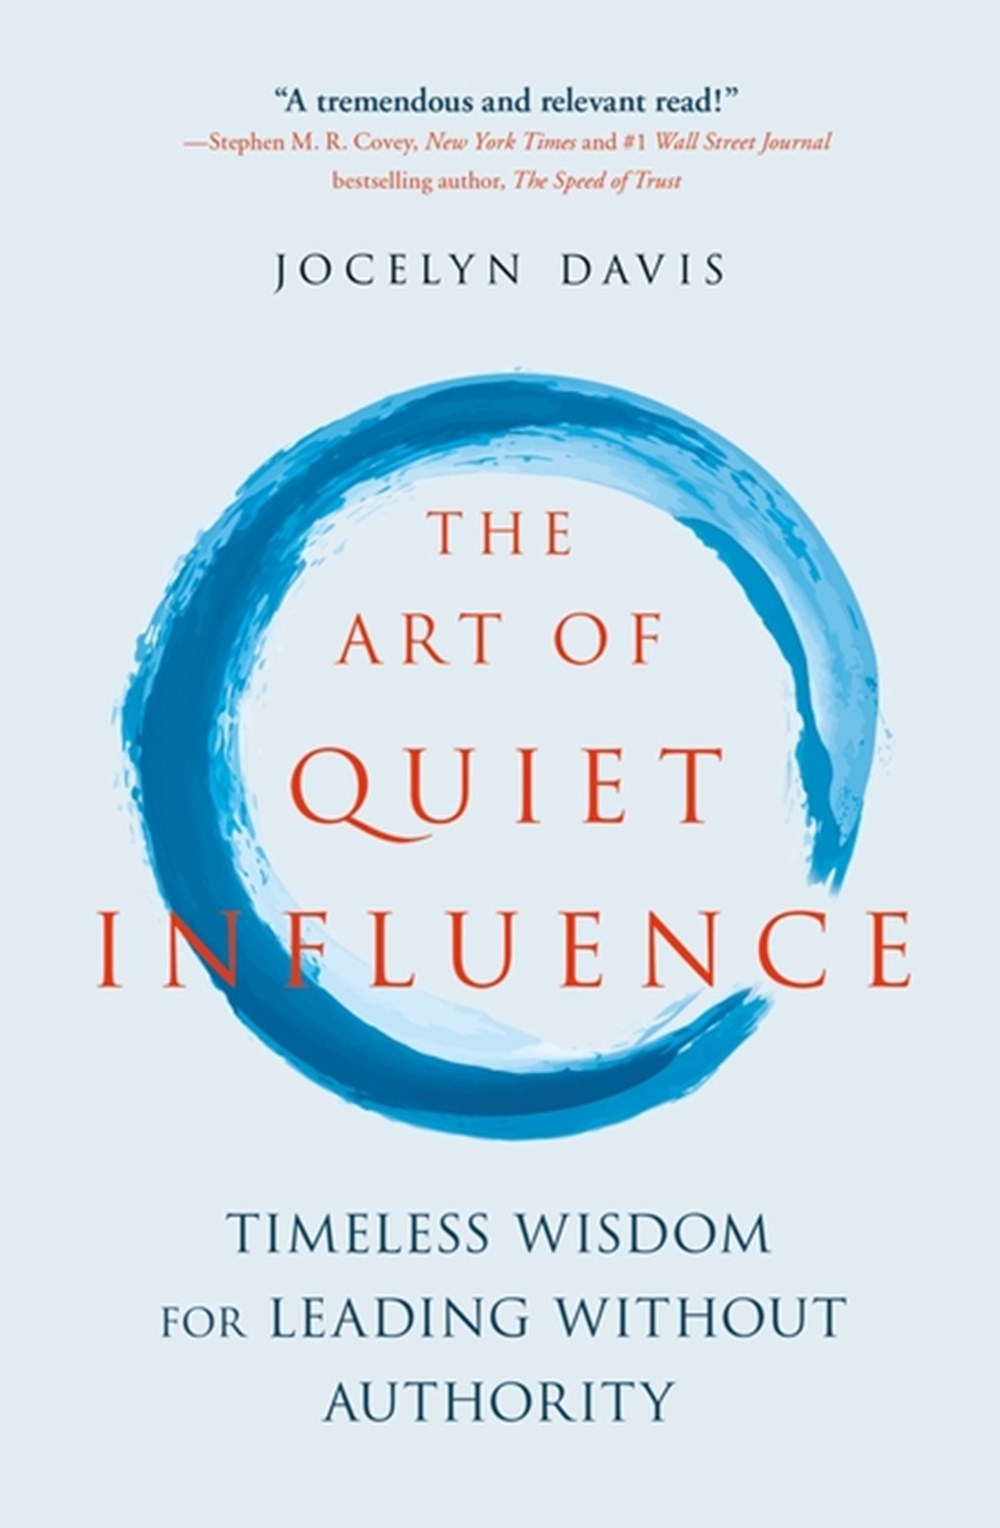 Art of Quiet Influence: Timeless Wisdom for Leading Without Authority